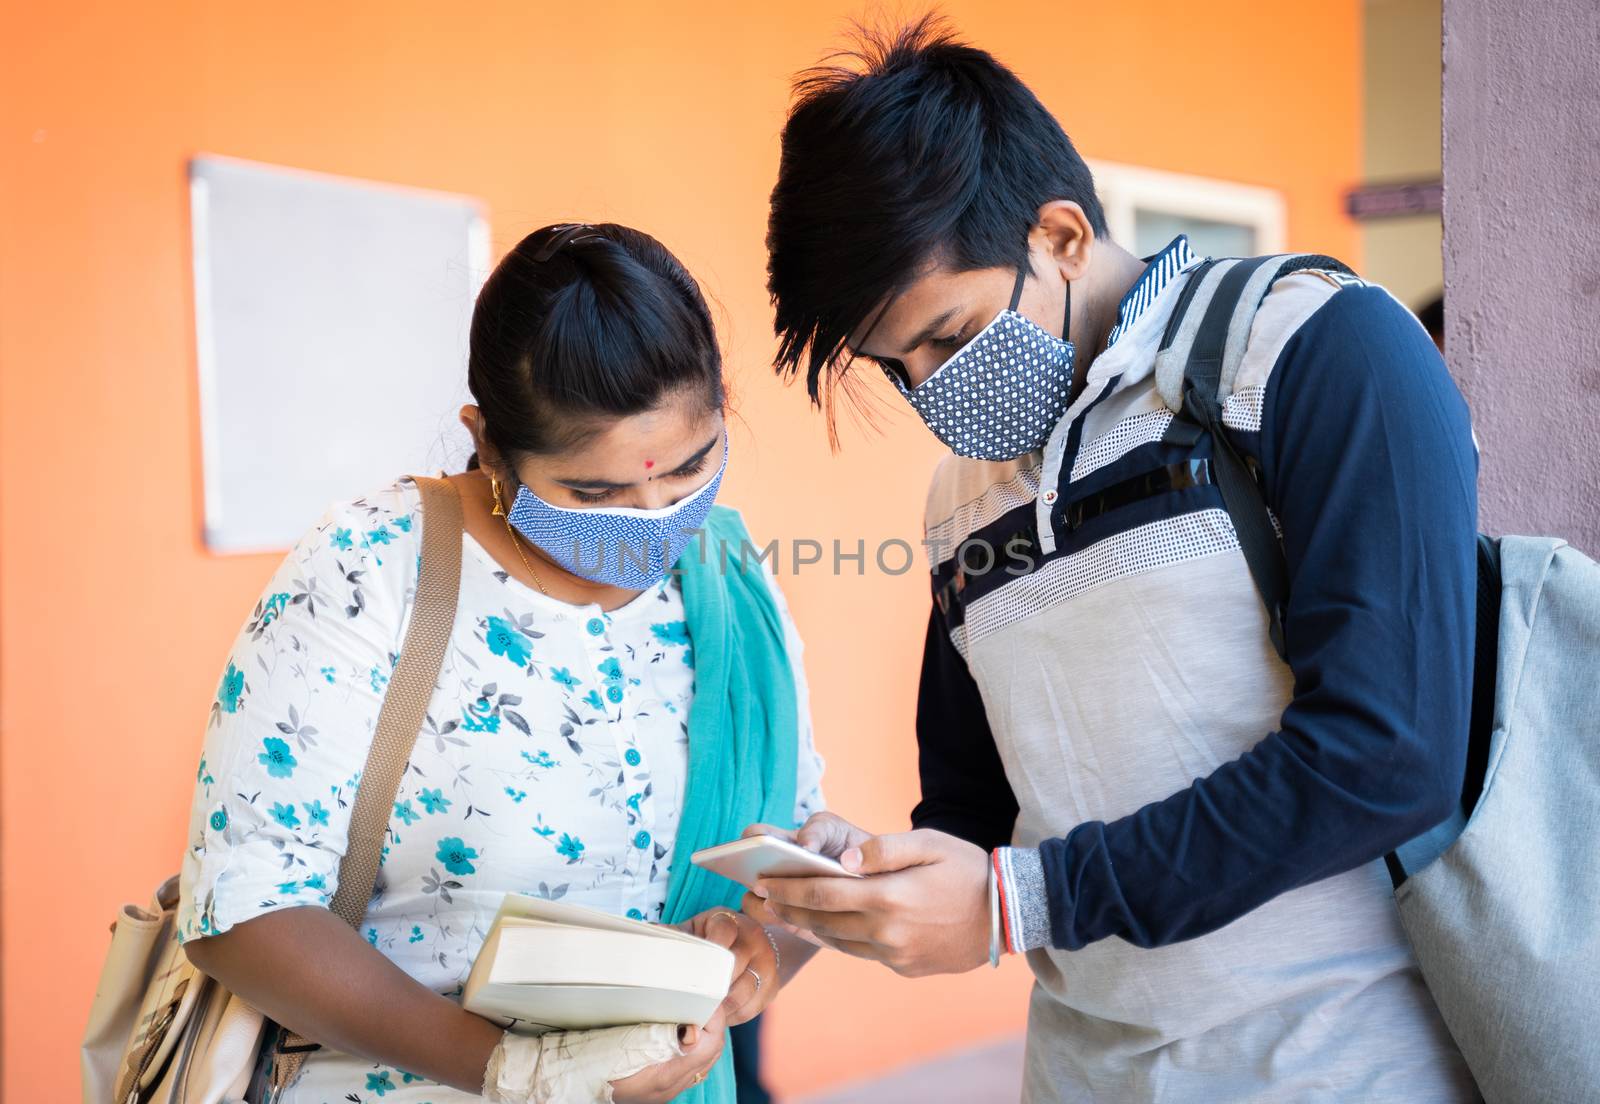 University students in medical mask busy on mobile phone at college corridor - concept of students using mobile, technology, Internet and college reopen after covid-19 coronavirus pandemic